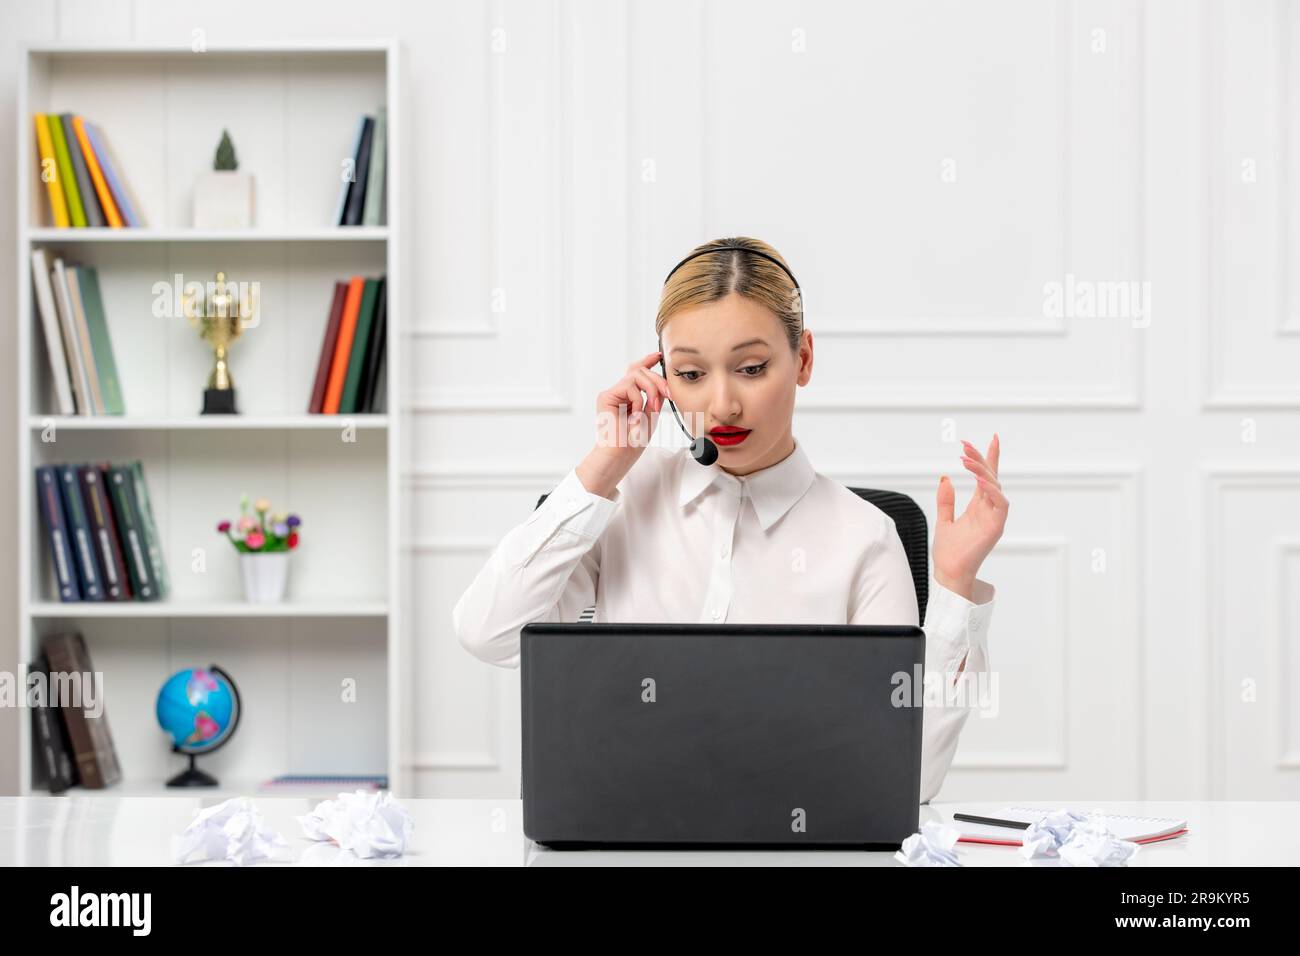 customer service cute blonde girl office shirt with headset and computer wondering on the phone Stock Photo